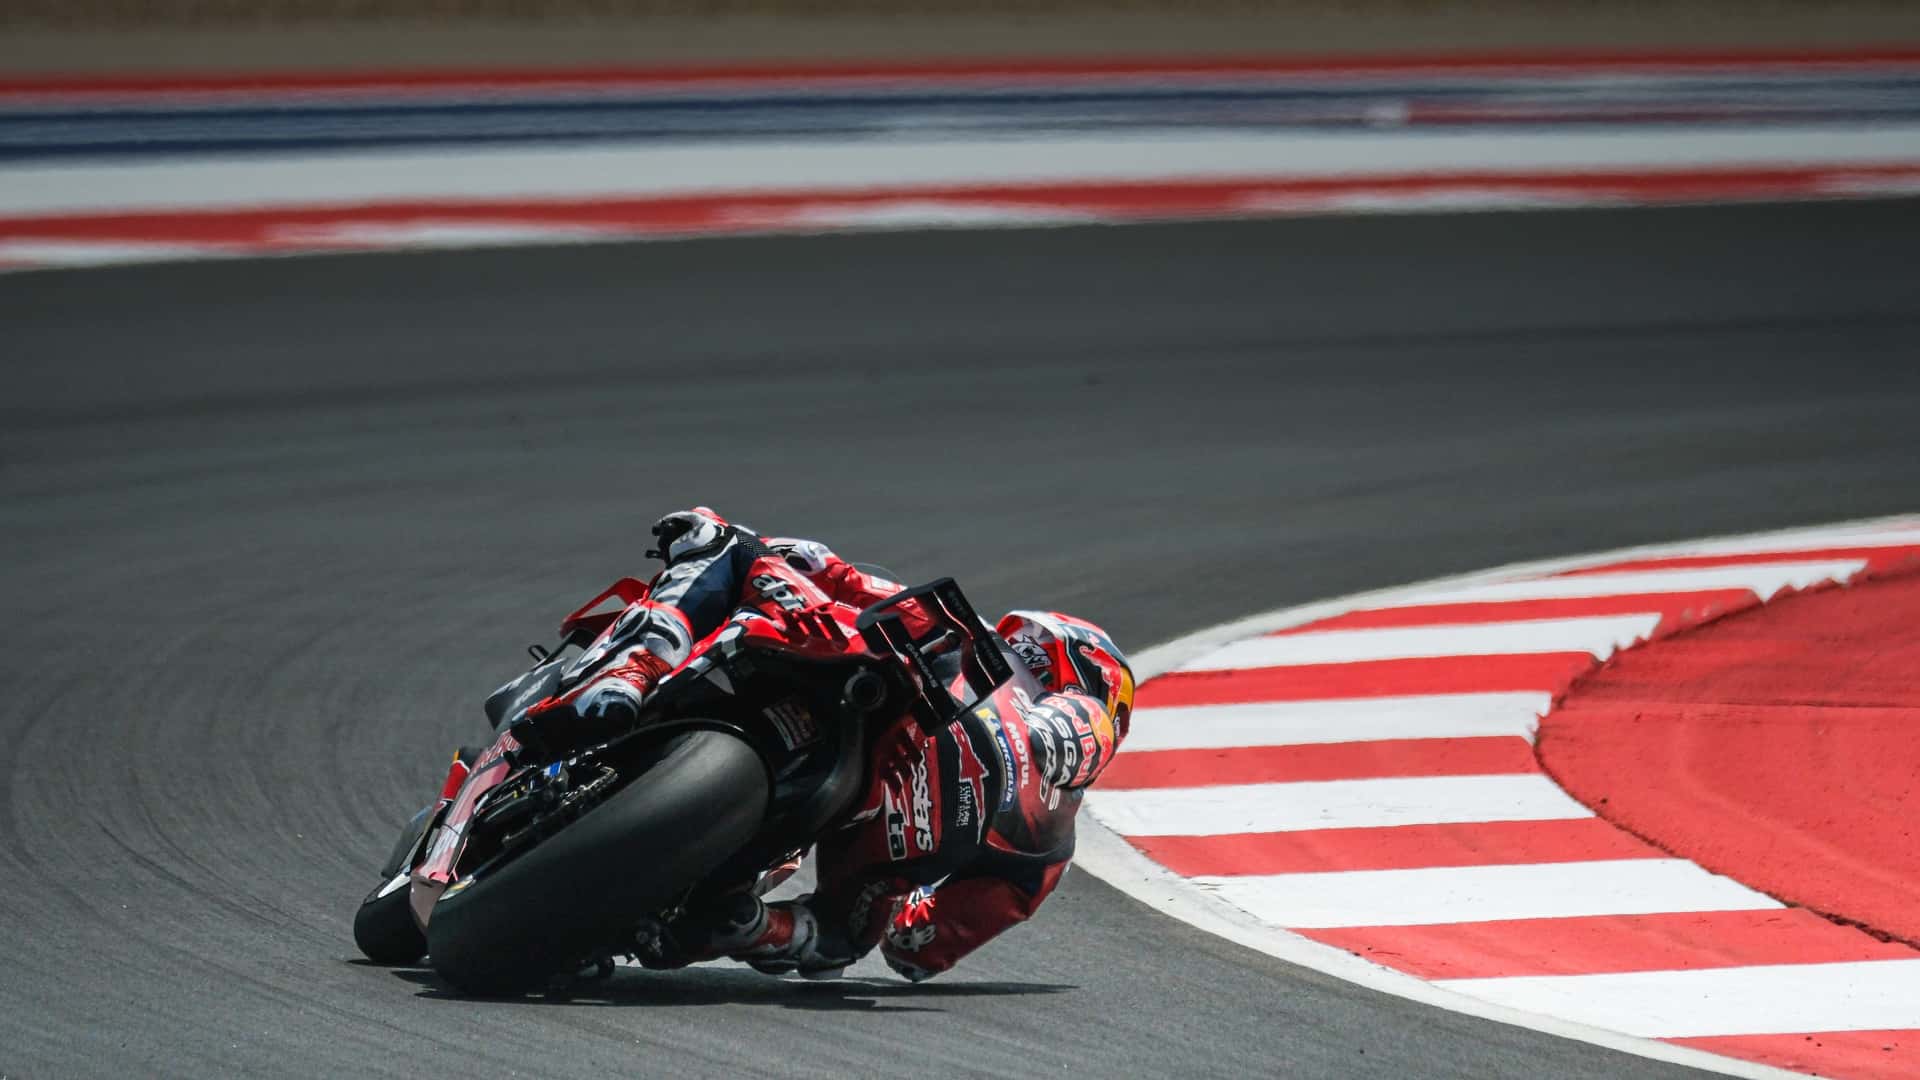 flip through our motogp photo journal and get hyped for next year's race